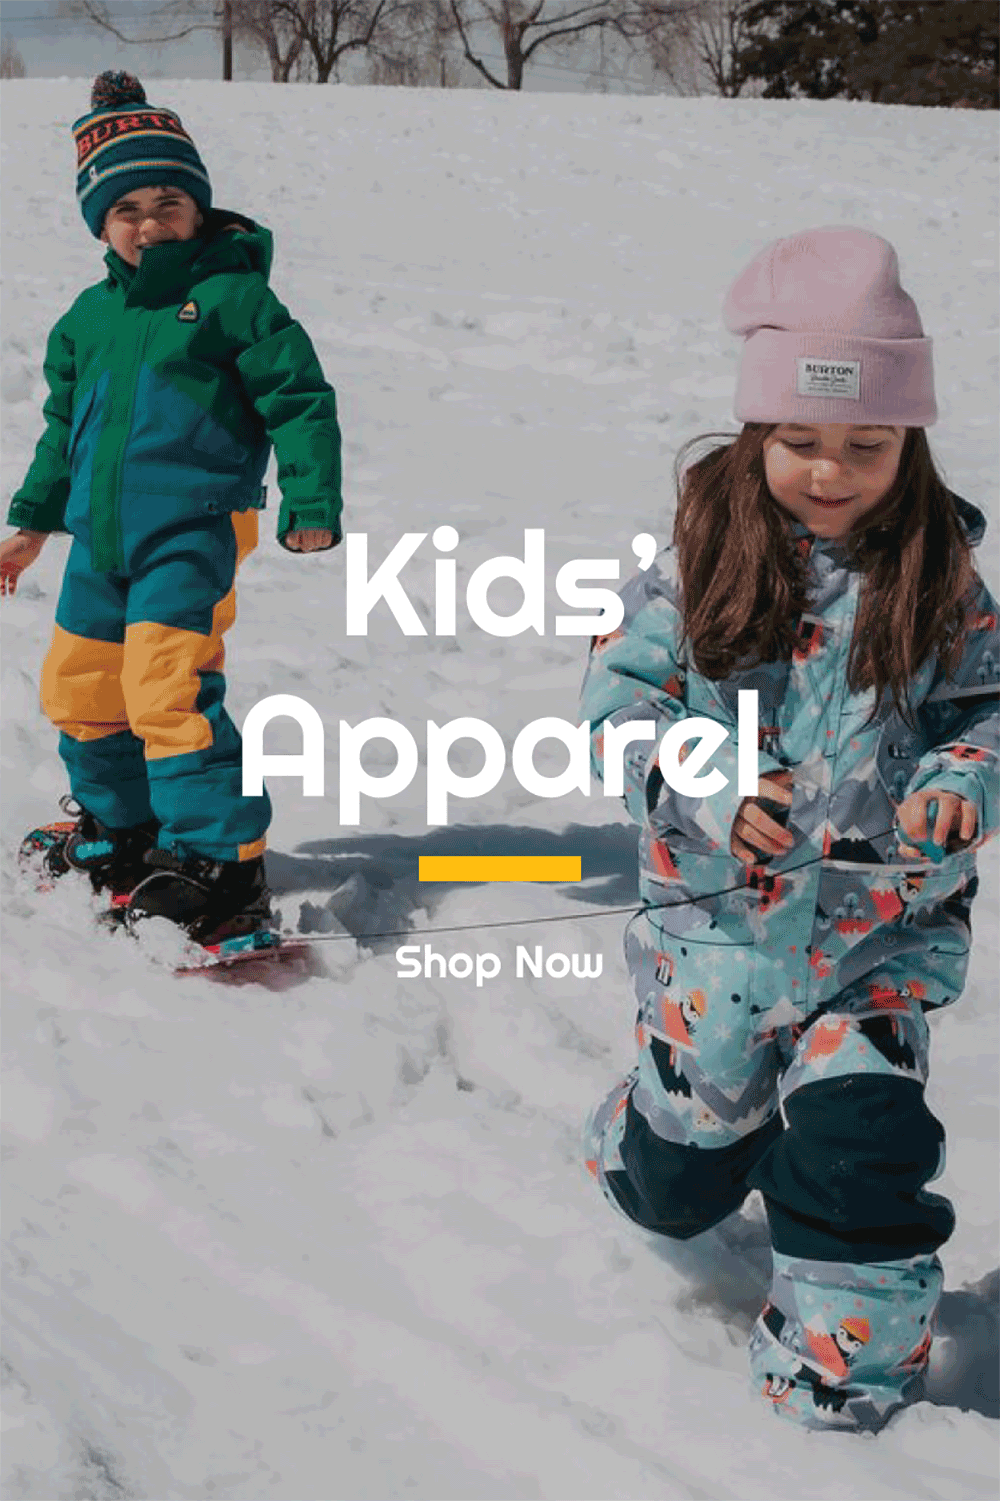 Buy Youth Snowboard Apparel